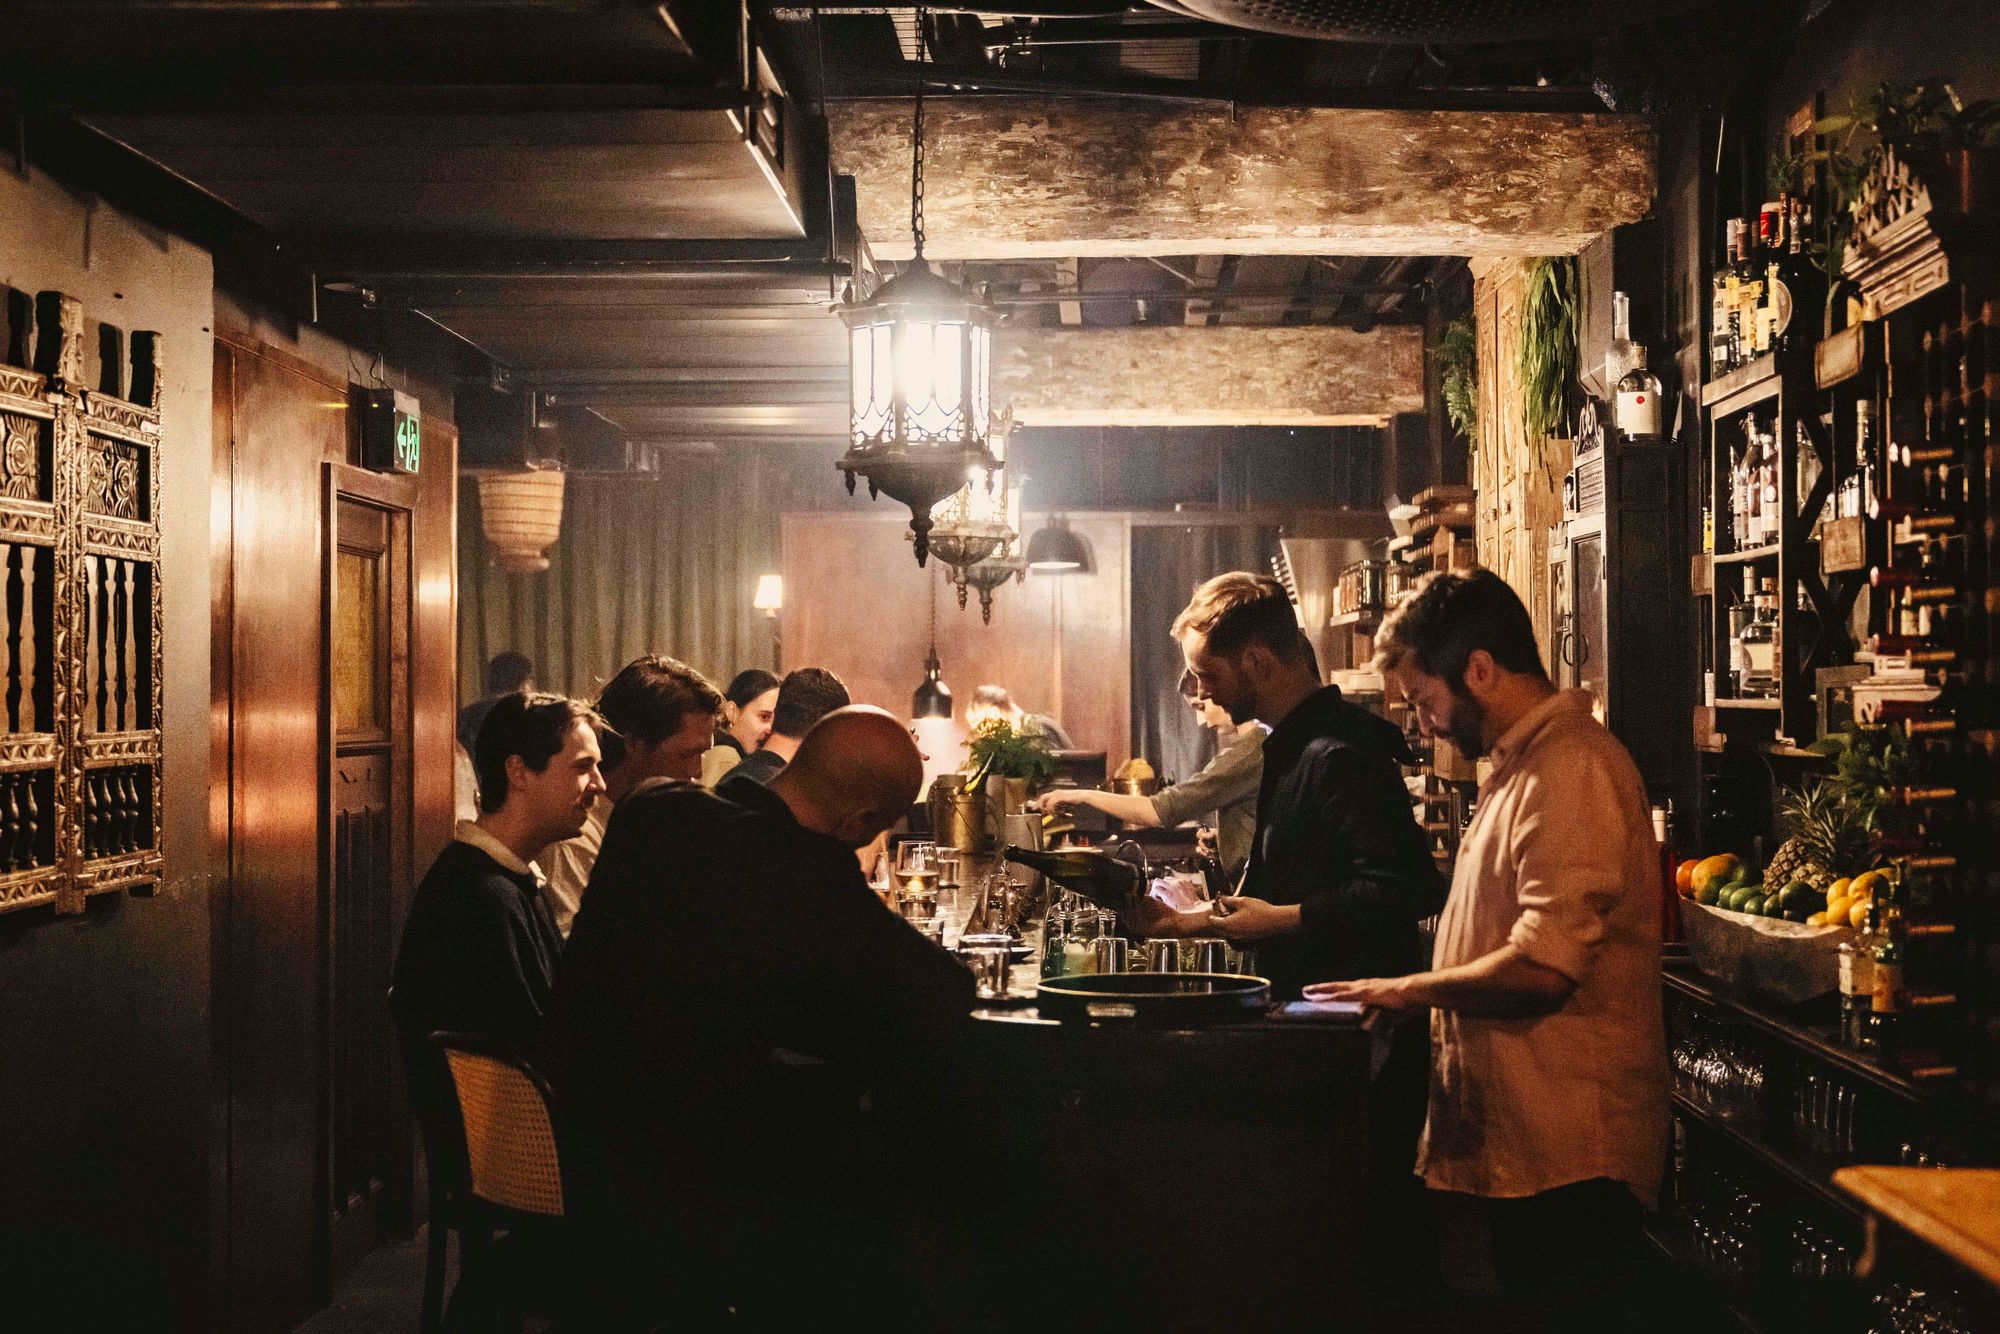 The bar at Ginny's Canoe Club. Photo: Christopher Pearce